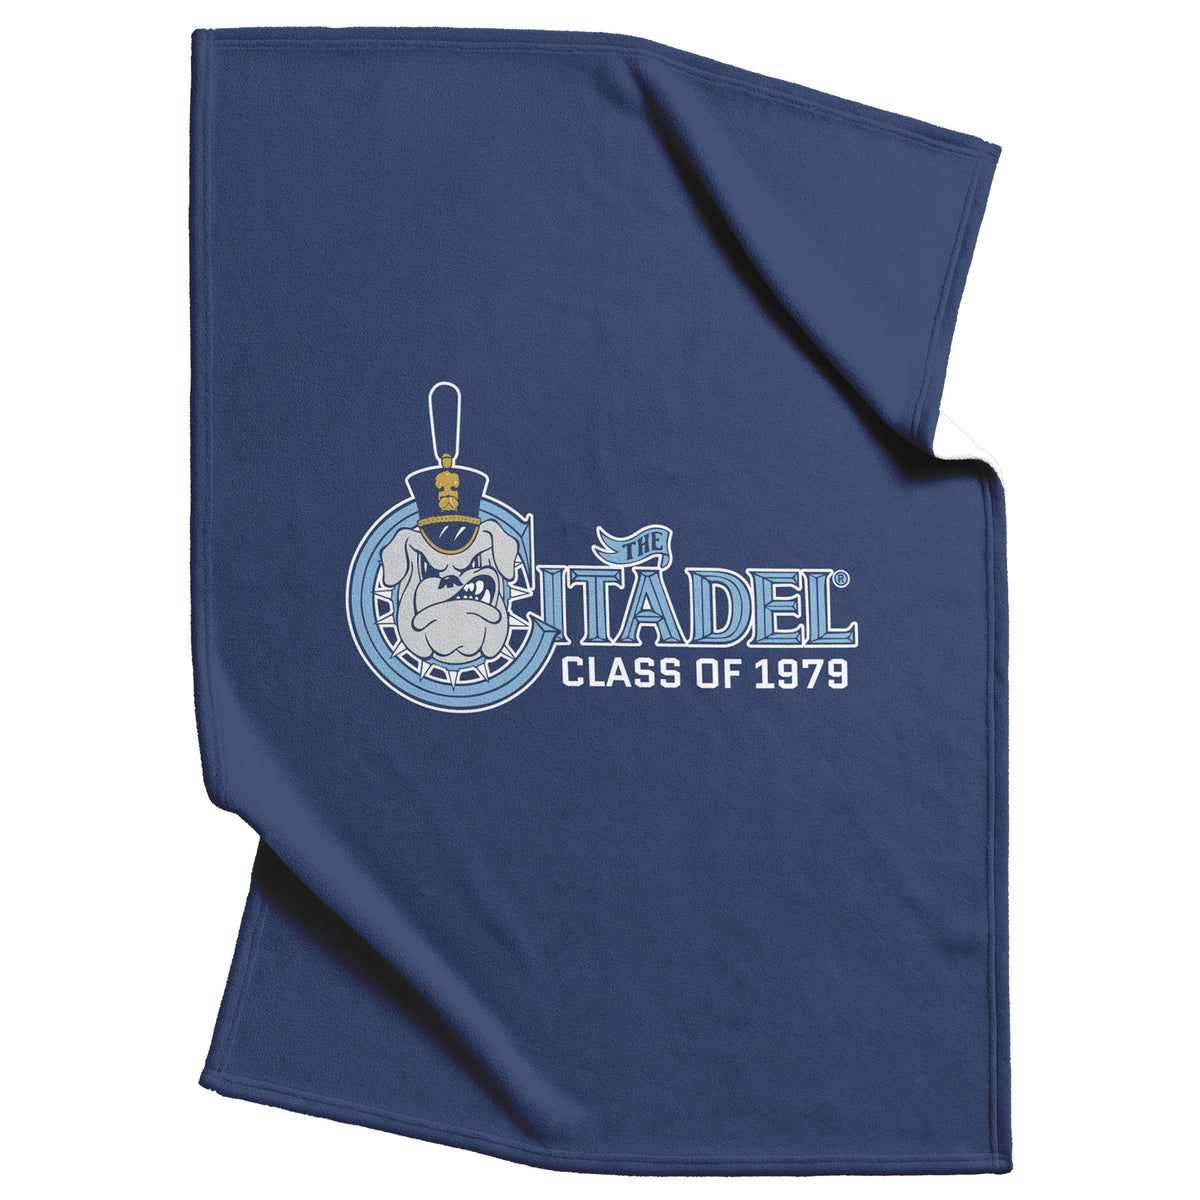 The Citadel Spike, Class of 1979 Blanket